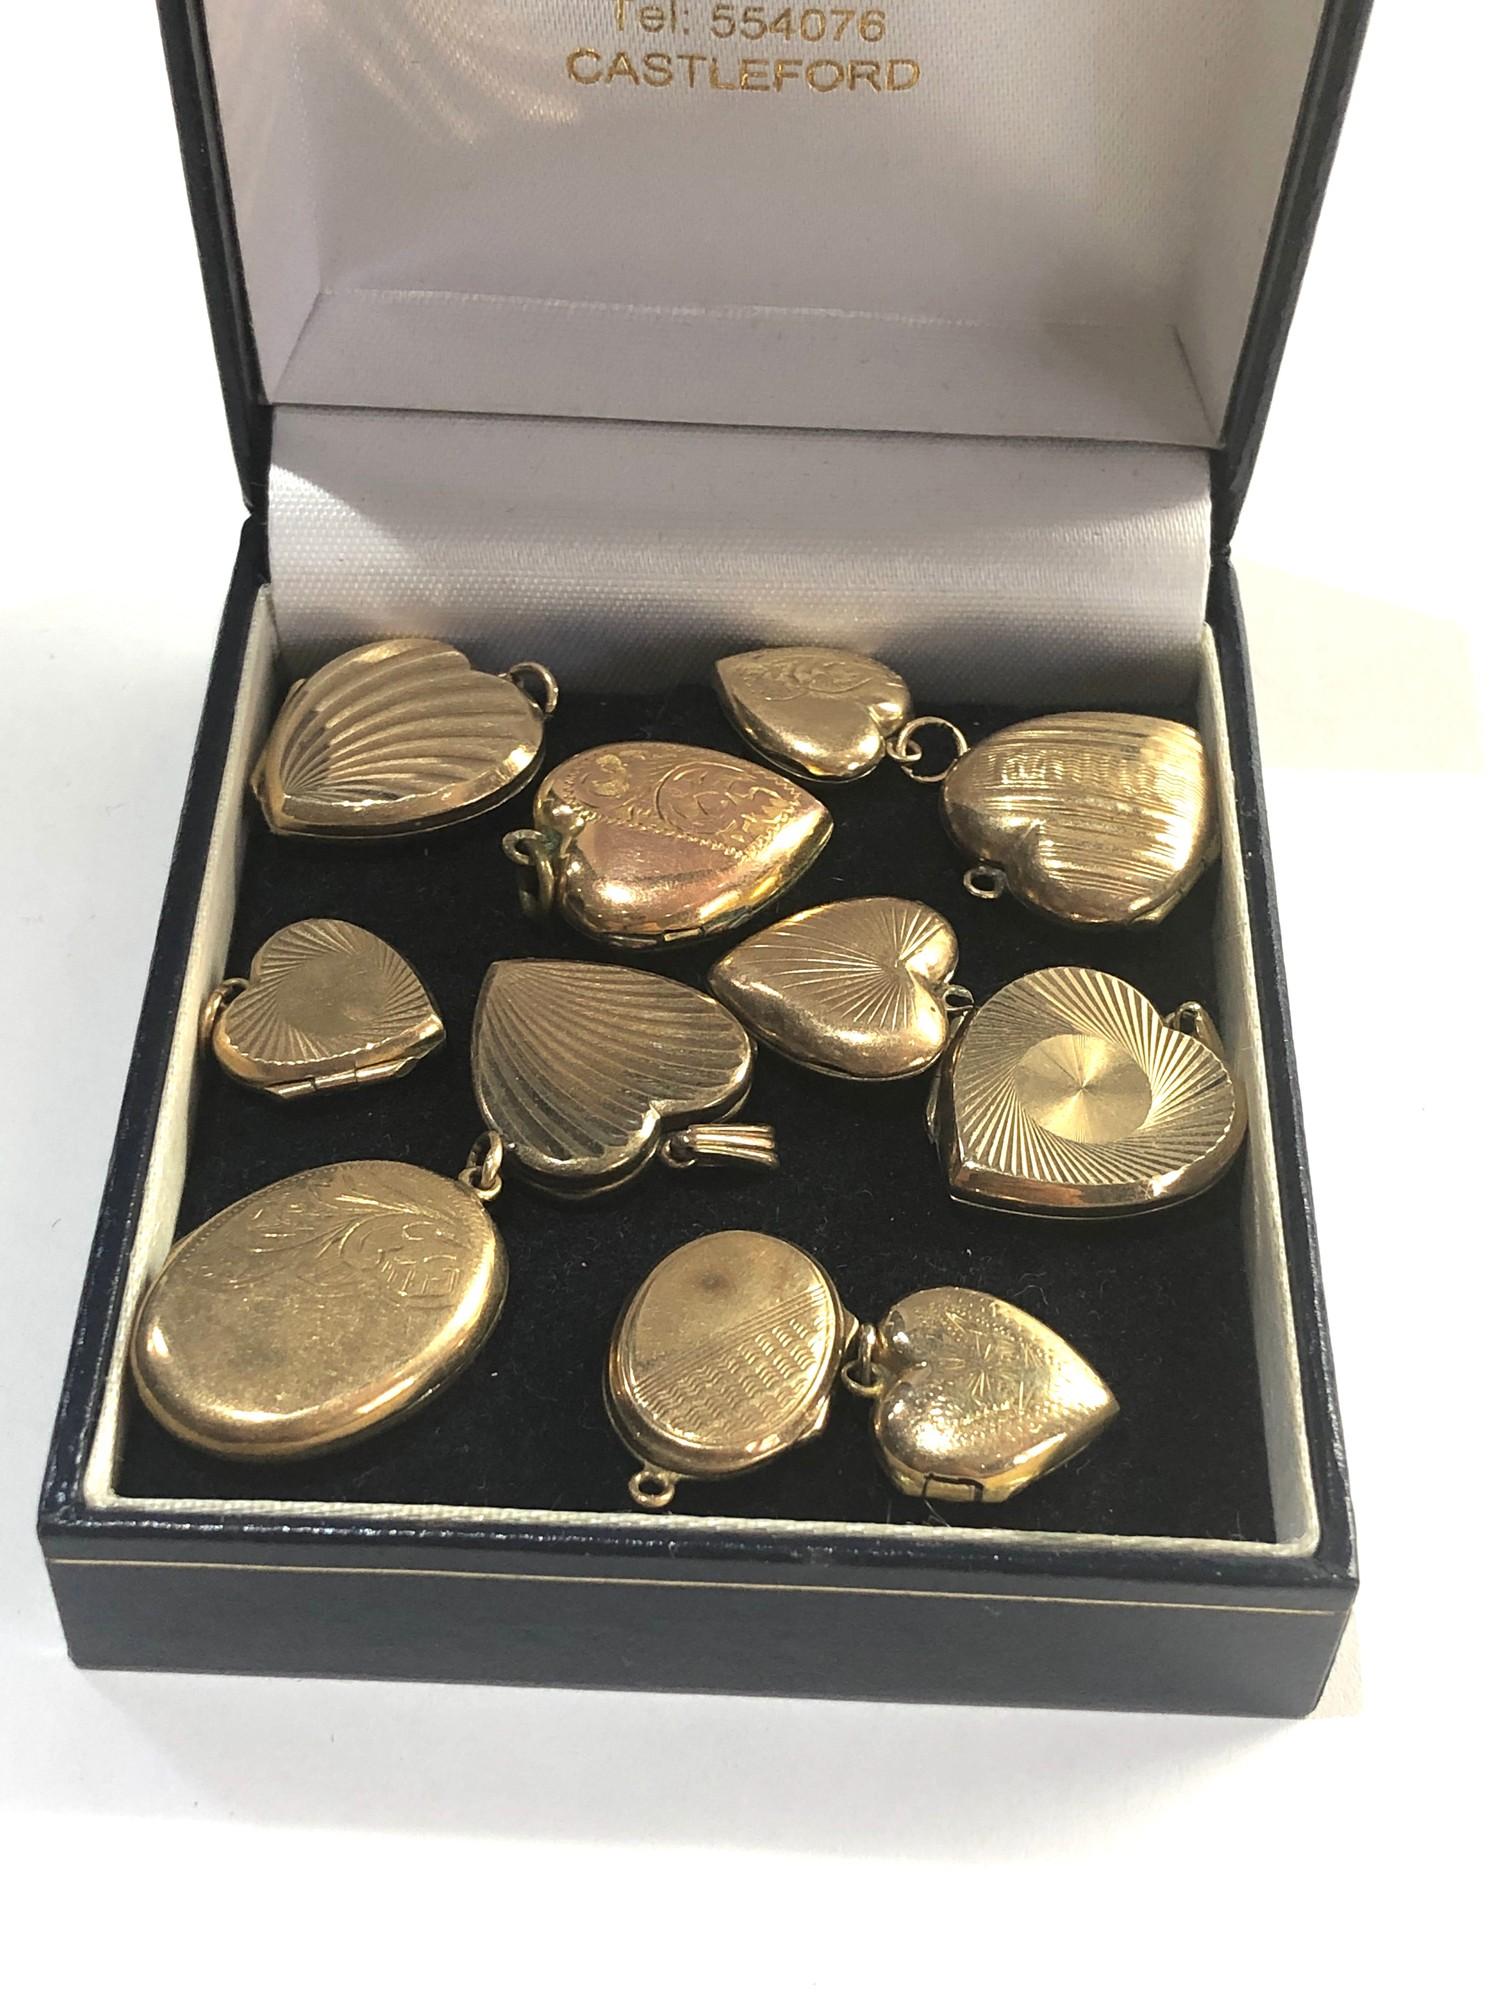 11 vintage gold back and front lockets all hallmarked on back 9ct back and front please see images